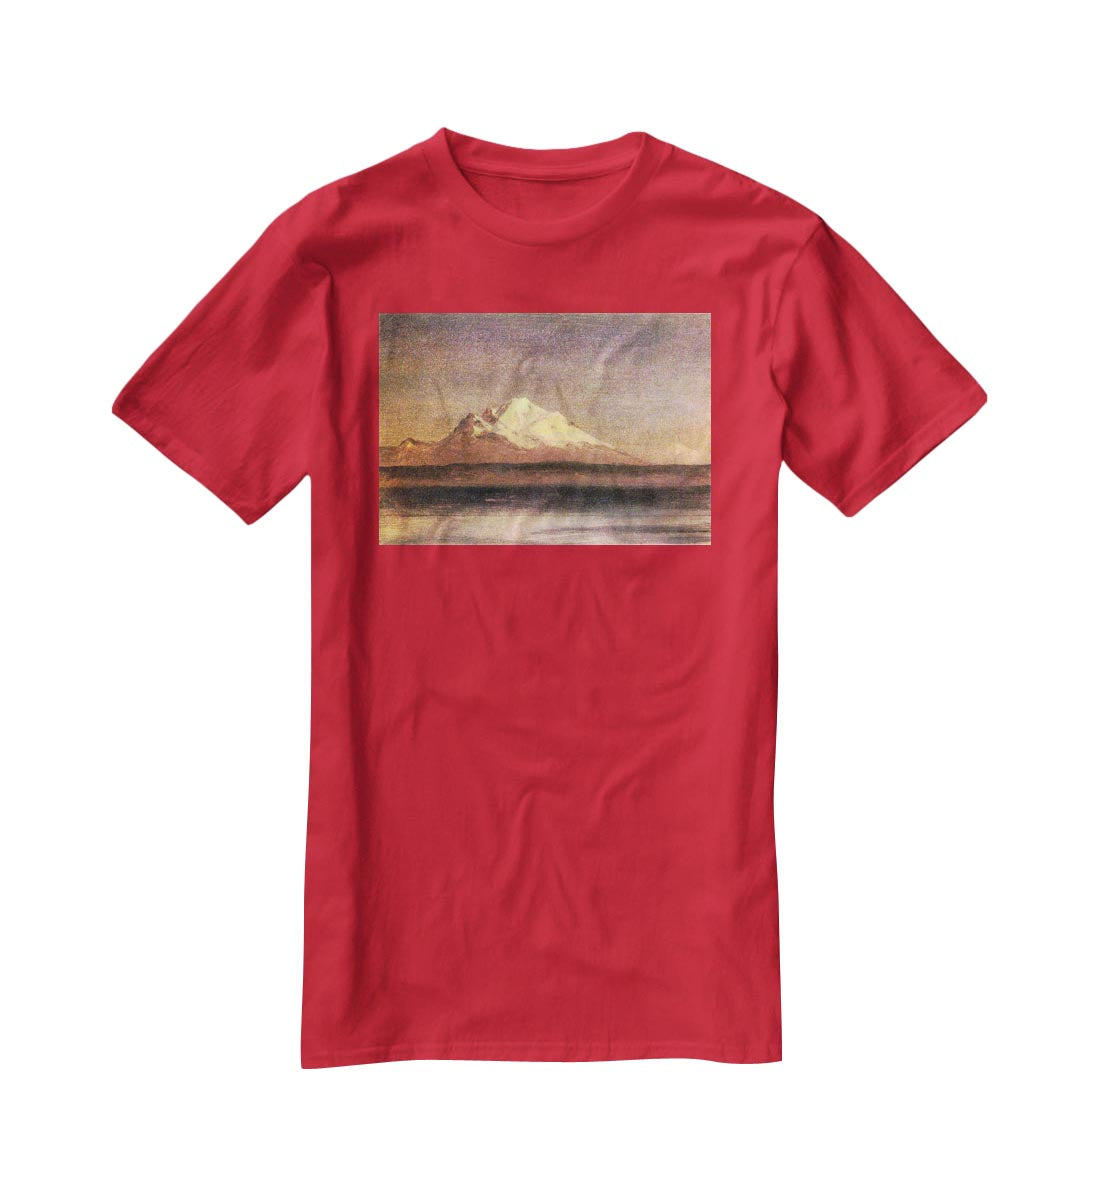 Snowy Mountains in the Pacific Northwest 2 by Bierstadt T-Shirt - Canvas Art Rocks - 4